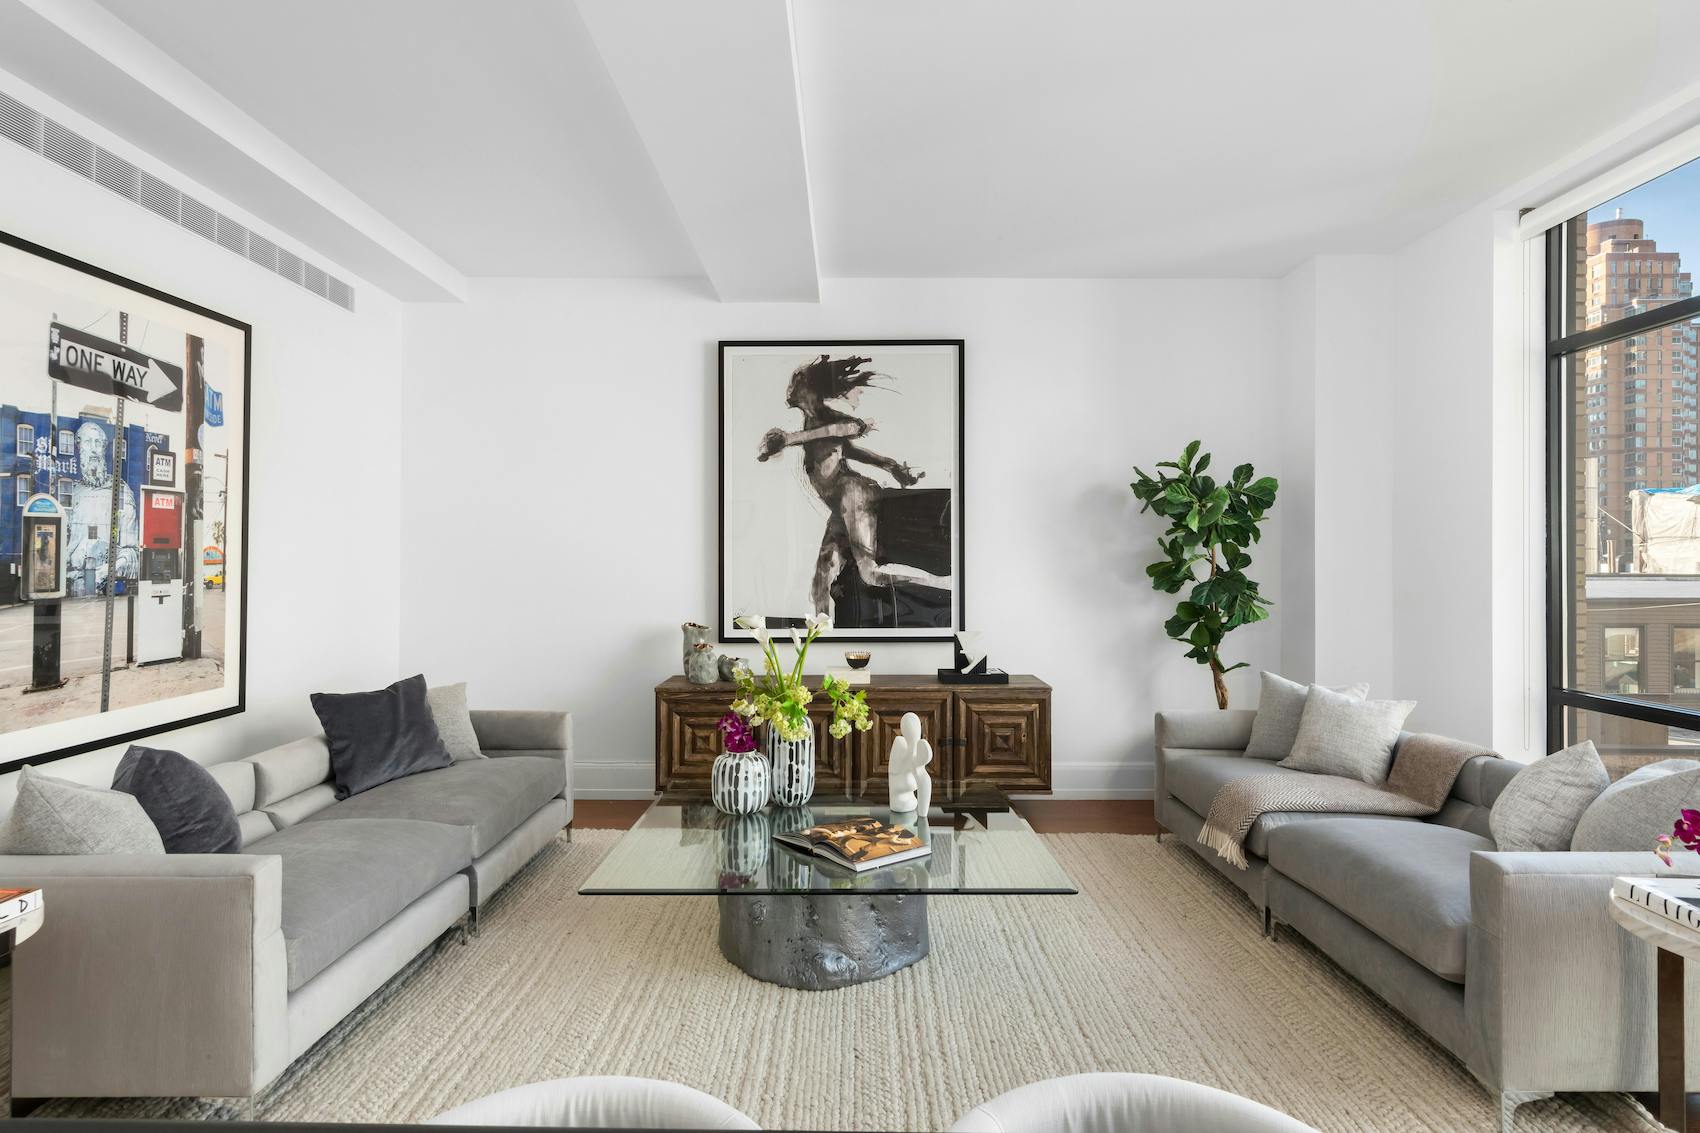 Meridith-Baer-Home-Home-Staging-New-York-Flatiron-Contemporary-Condo-Highrise-Condos-and-Lofts-Transitional-Living-Room